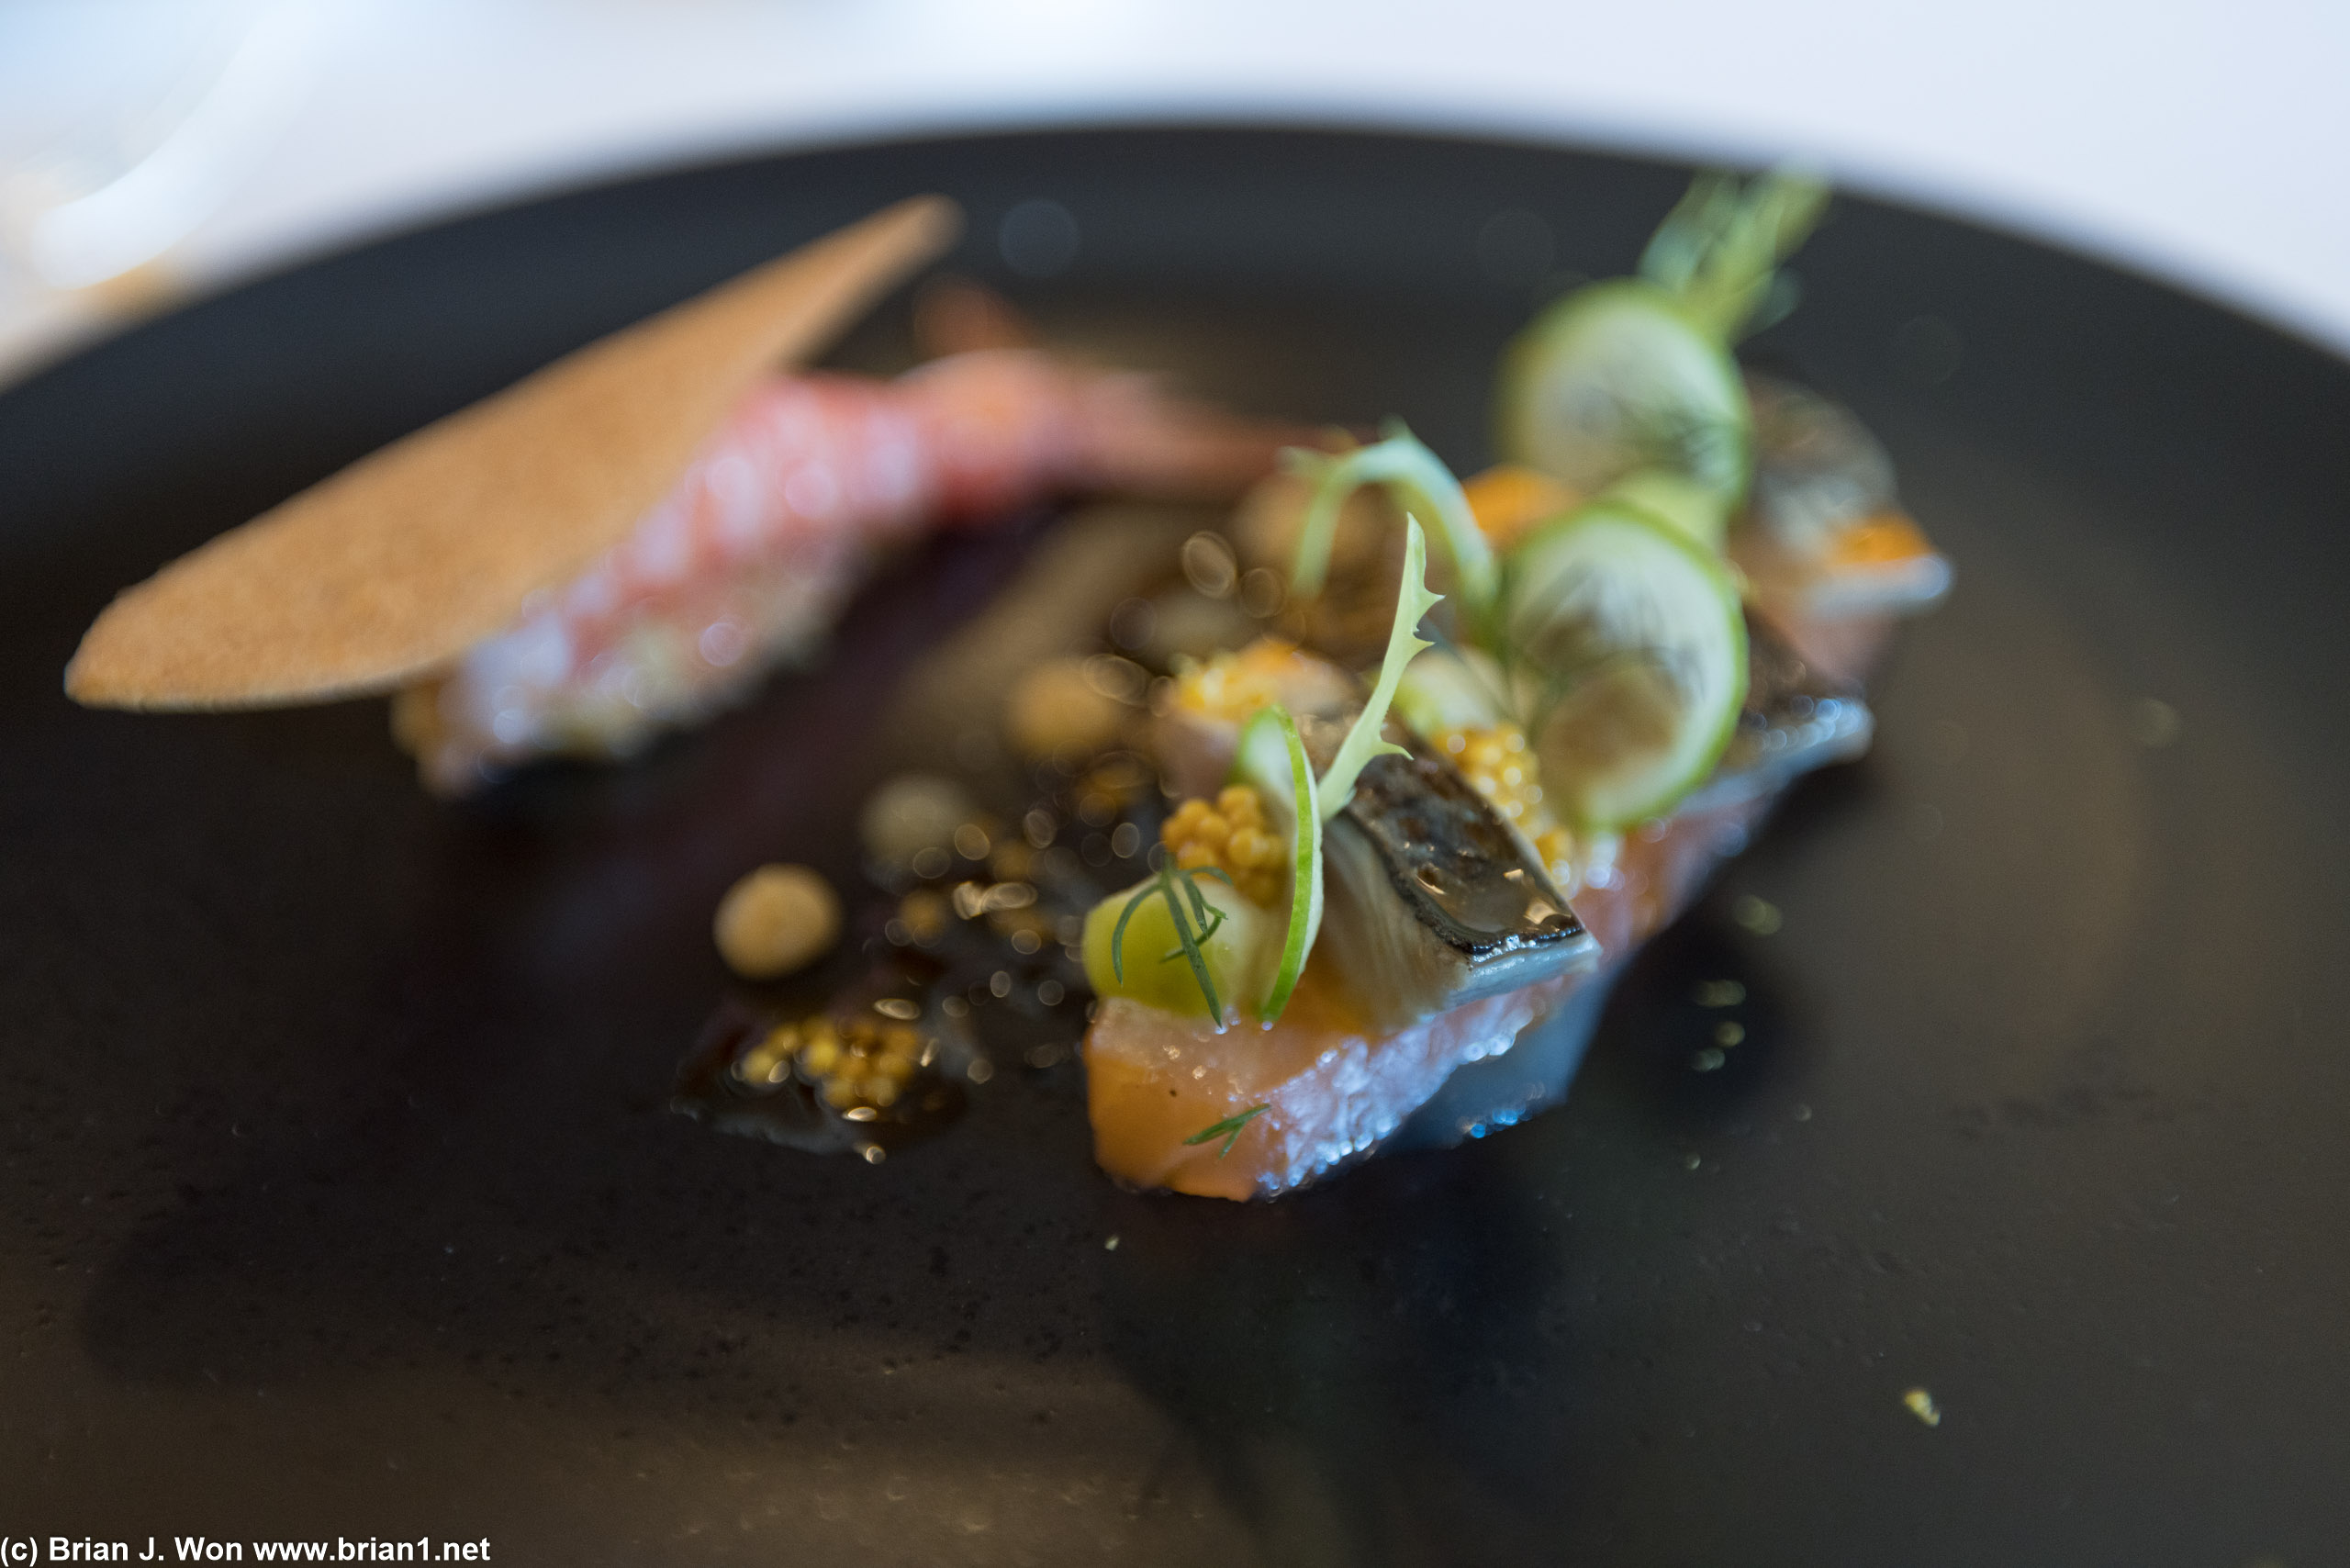 Half-cooked gambero rosso (shrimp) with pickled mustard seed, back of salmon gravlax with citrus marinated mackerel.